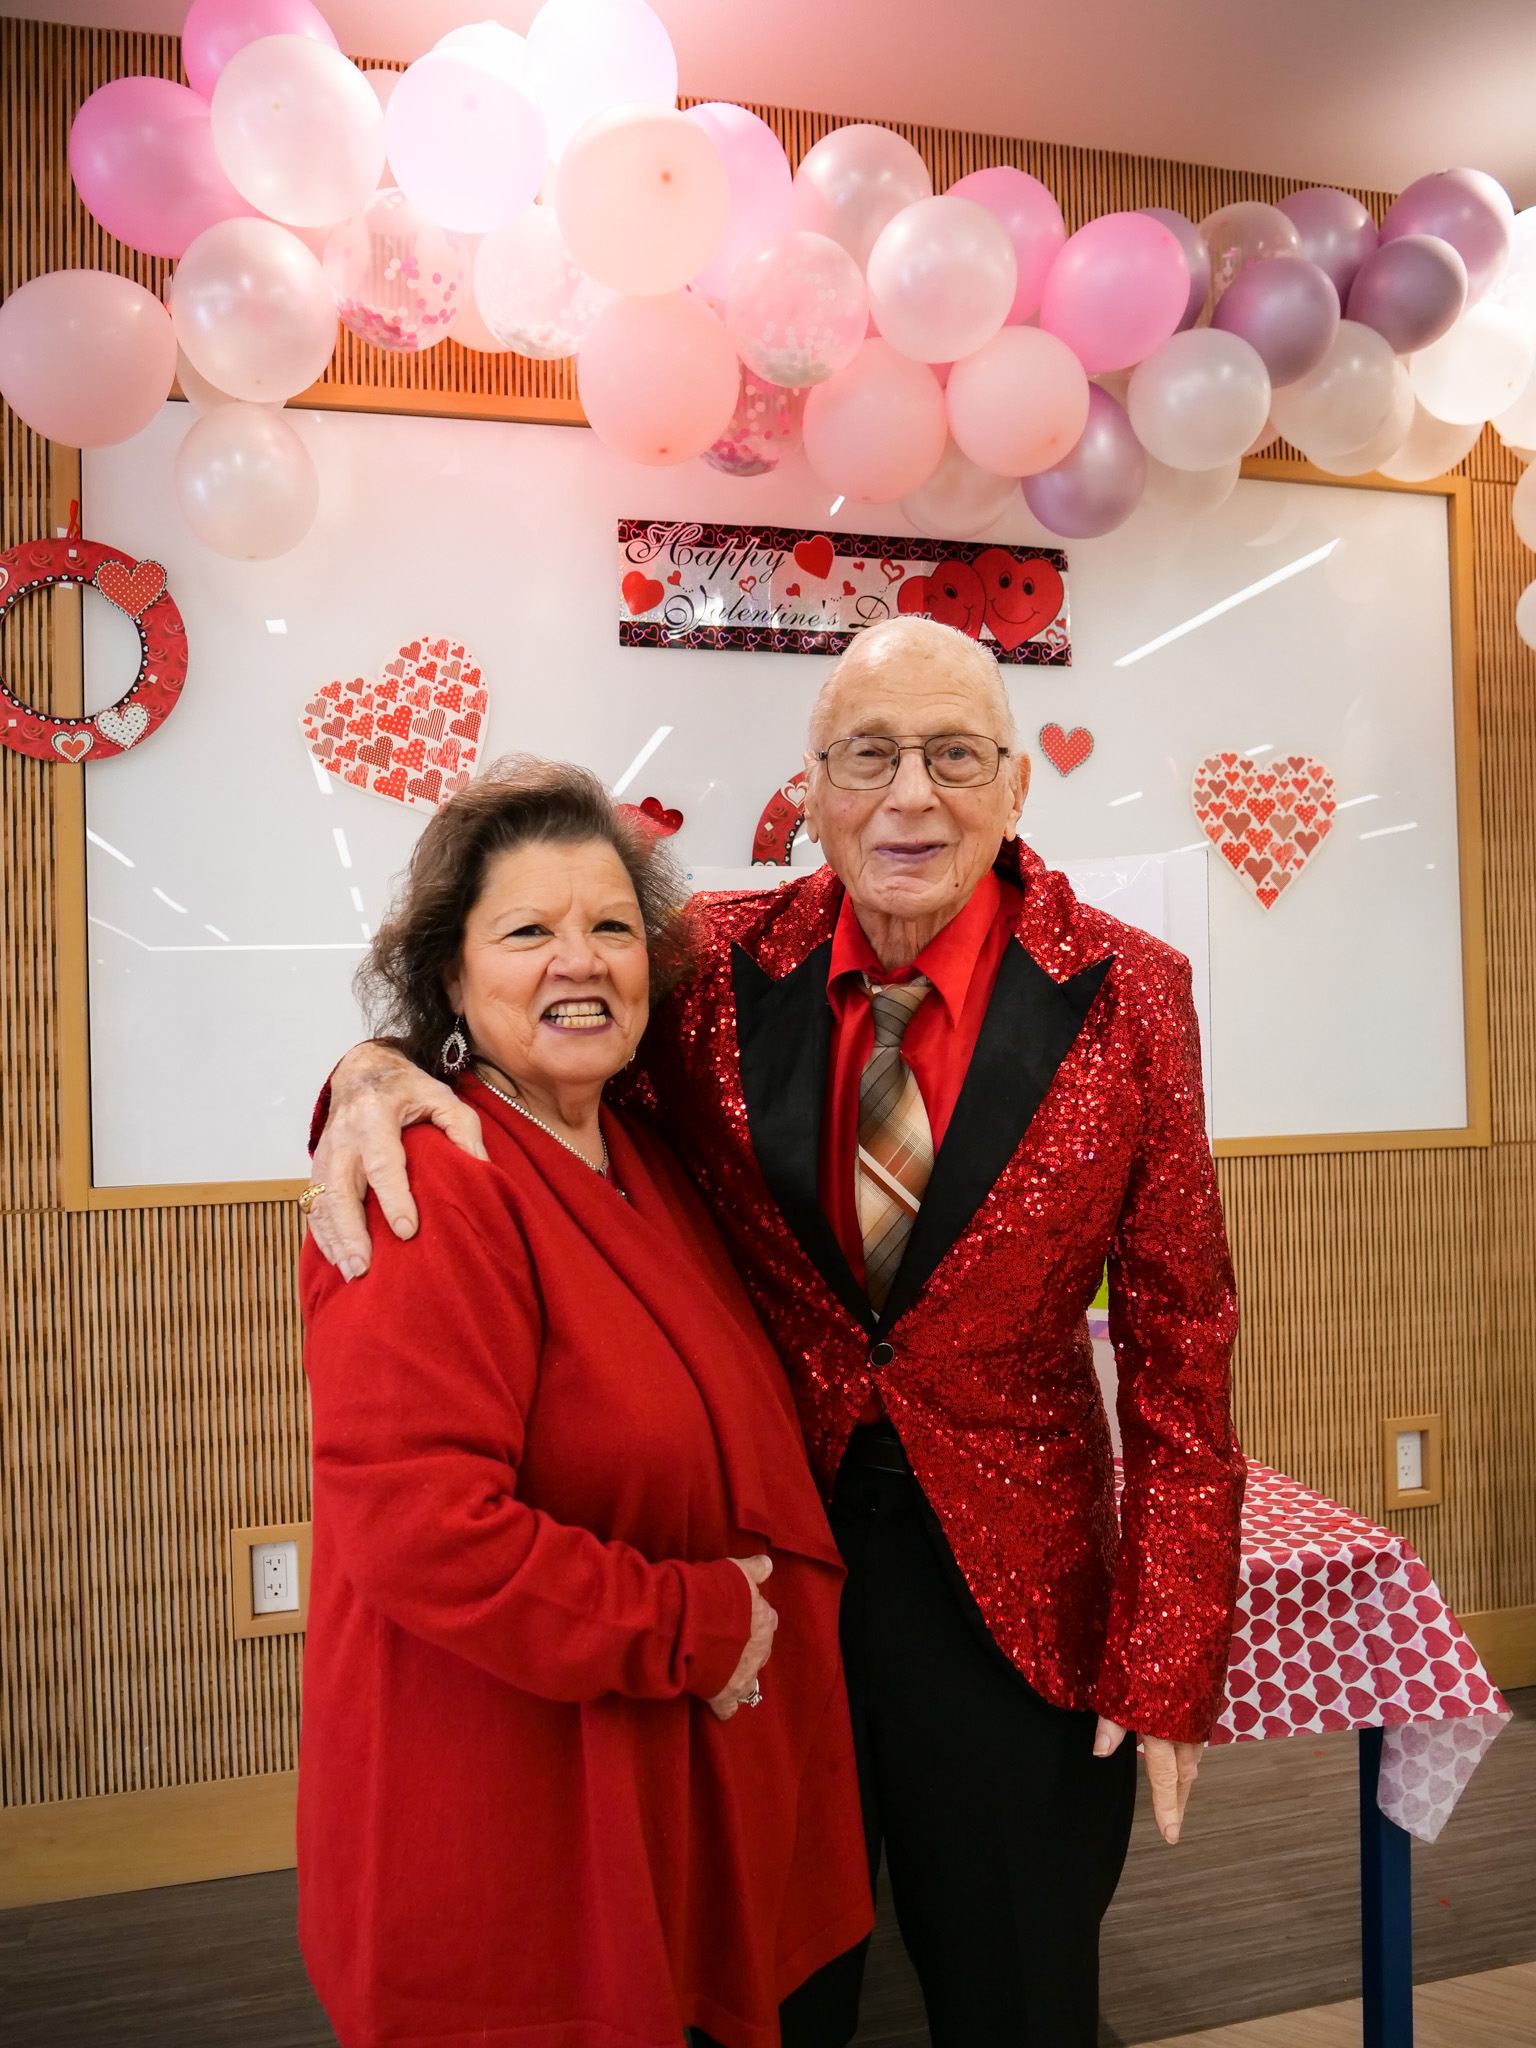 Older adult man in red sparkling blazer with his arm around an older adult woman wearing a red cardigan